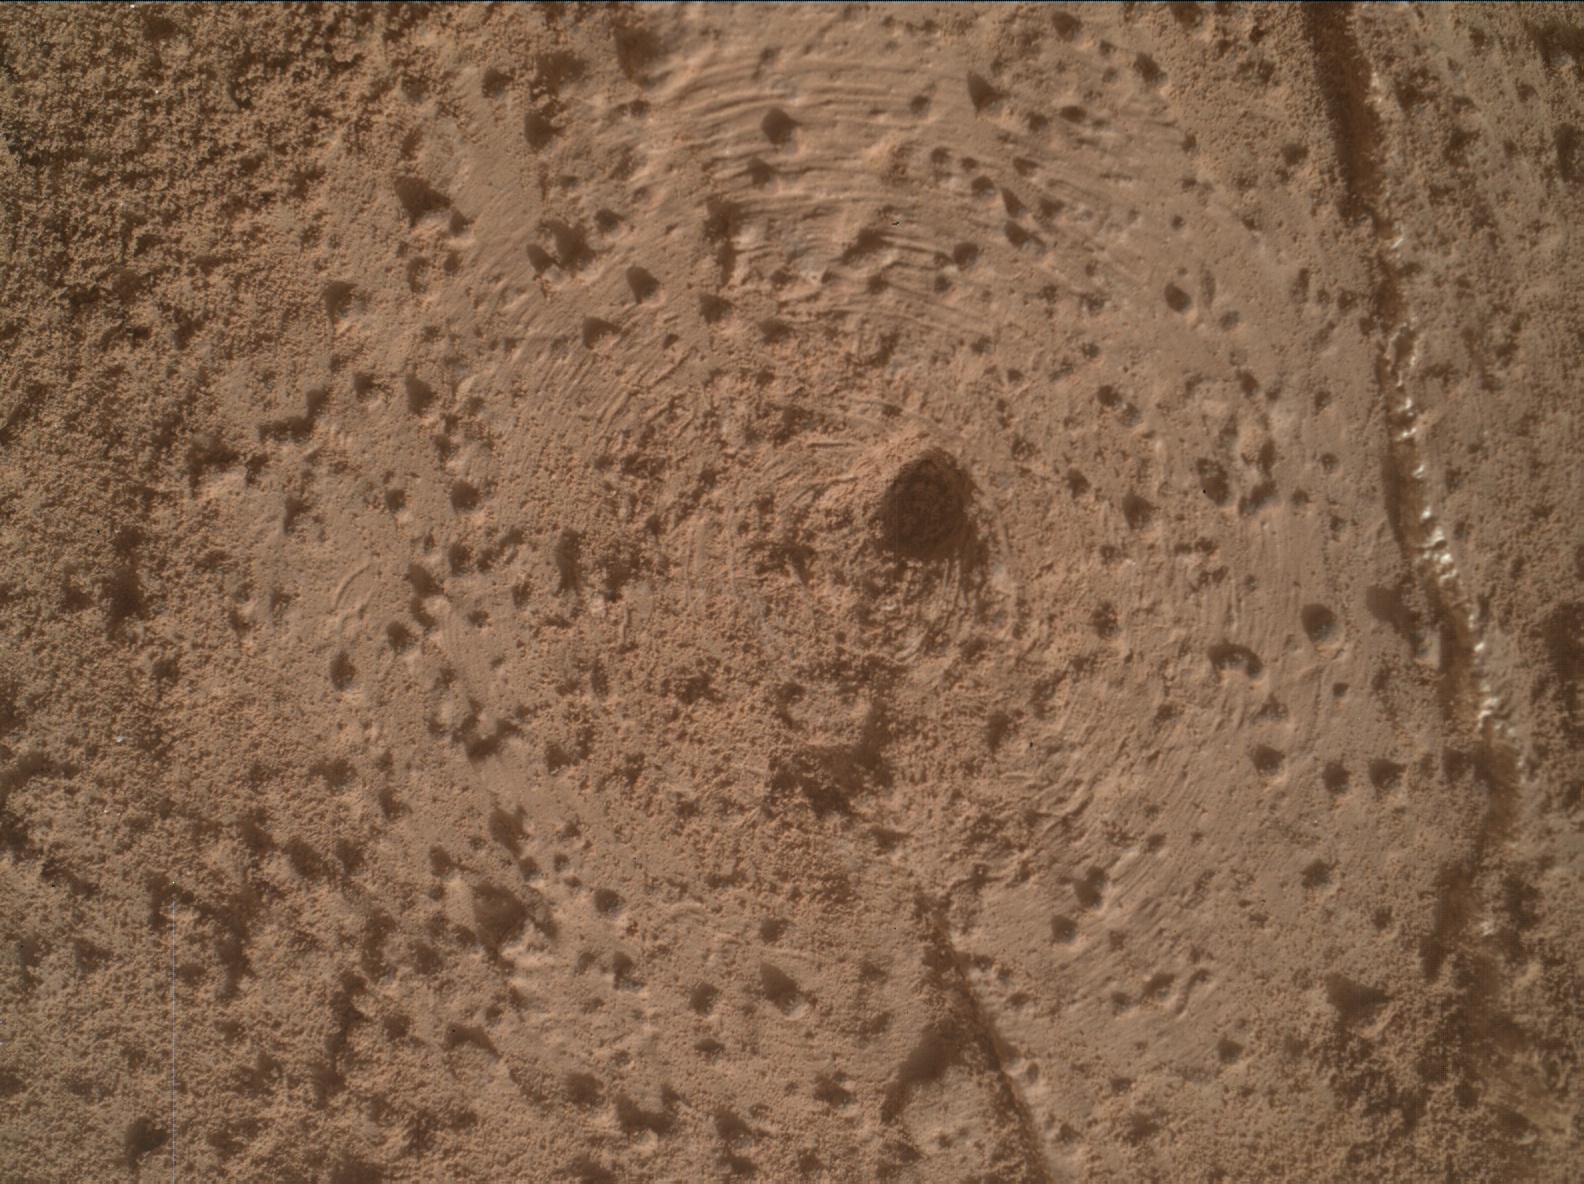 Nasa's Mars rover Curiosity acquired this image using its Mars Hand Lens Imager (MAHLI) on Sol 3387